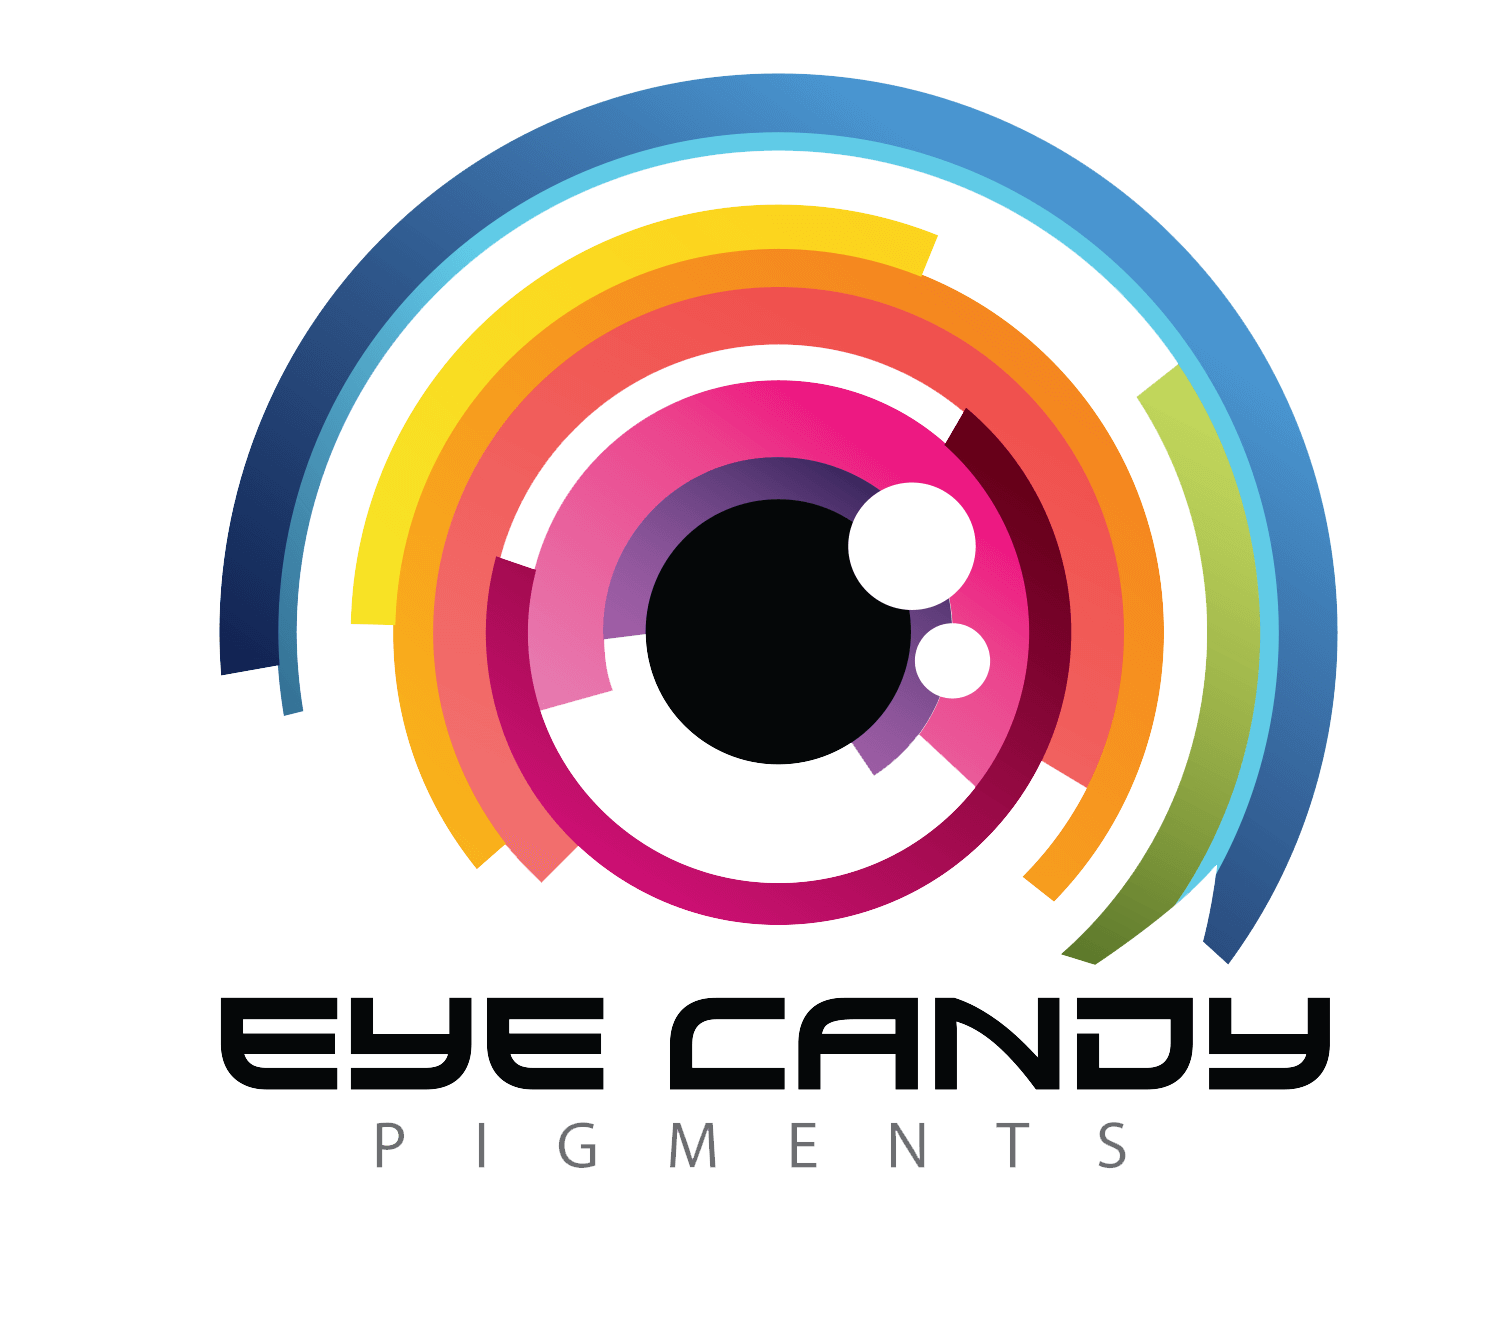 Eye Candy Pigments Buy 2 Get 1 Free Sale Starts Today – For Colors Black, Purple, Green & Blue ENDS 9-24-23